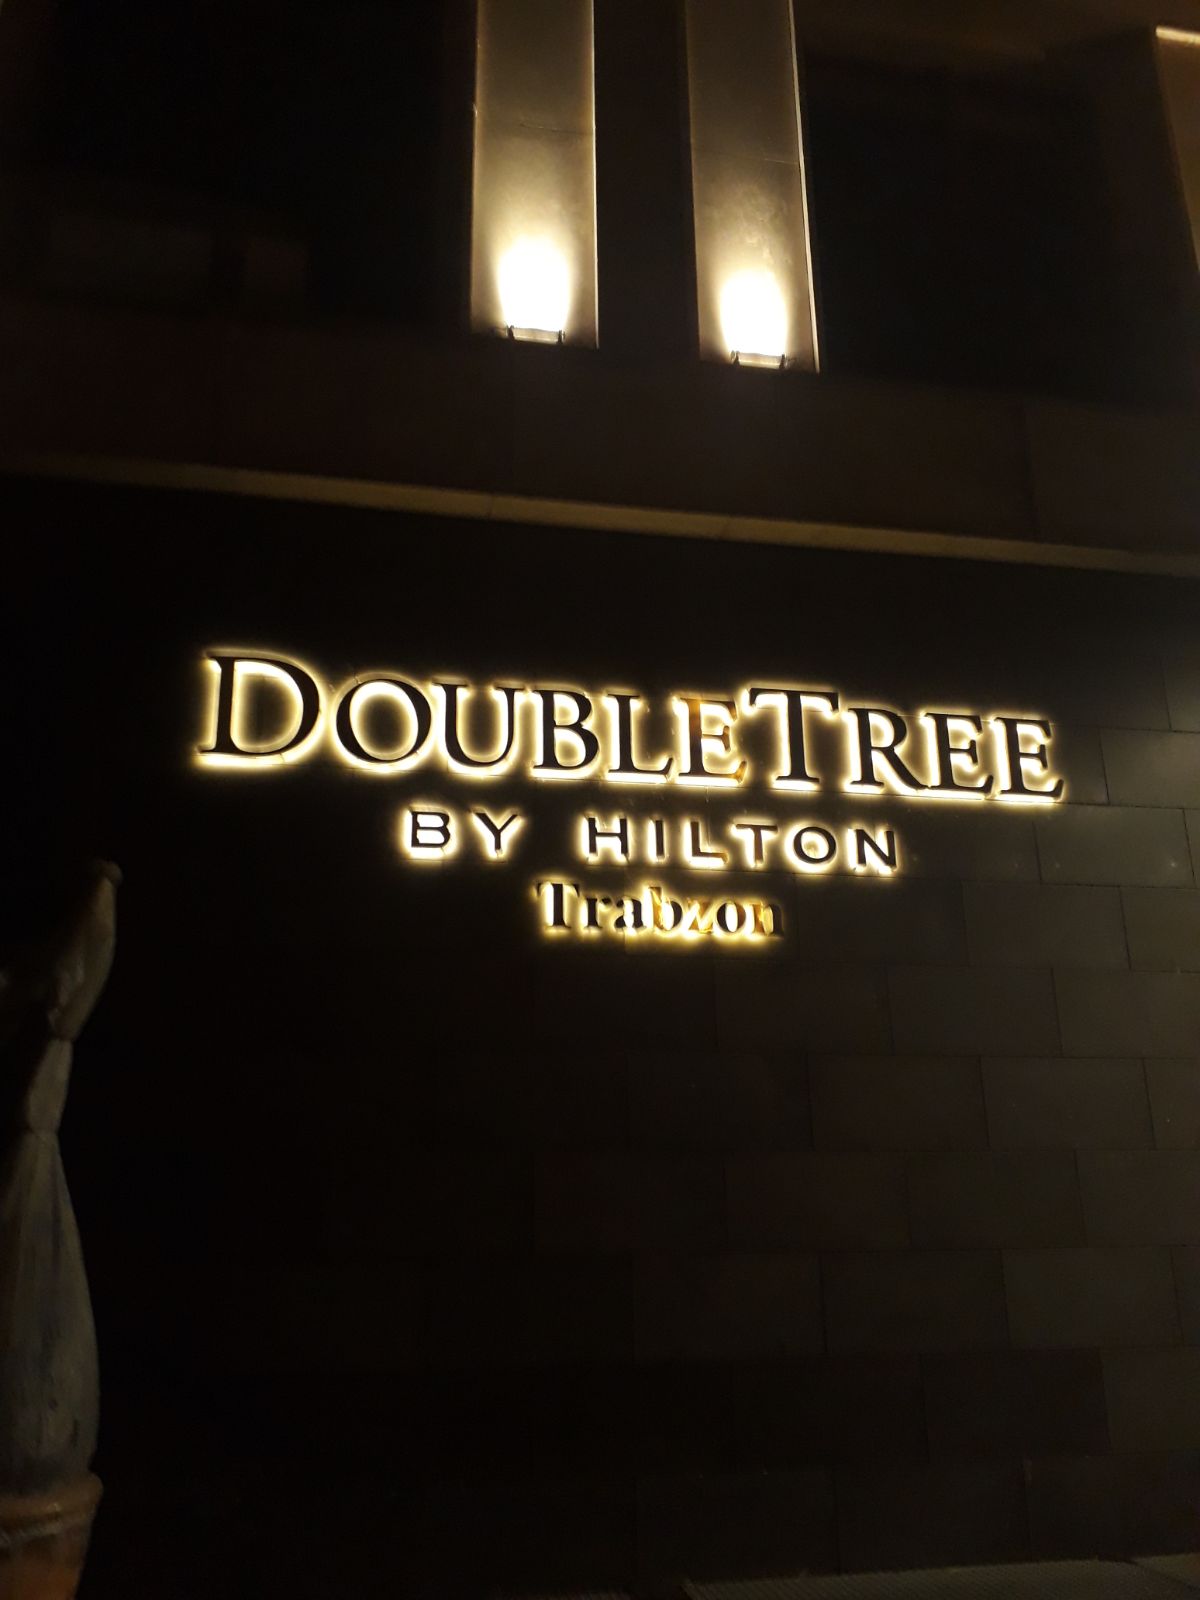 Double tree by hilton trabzon